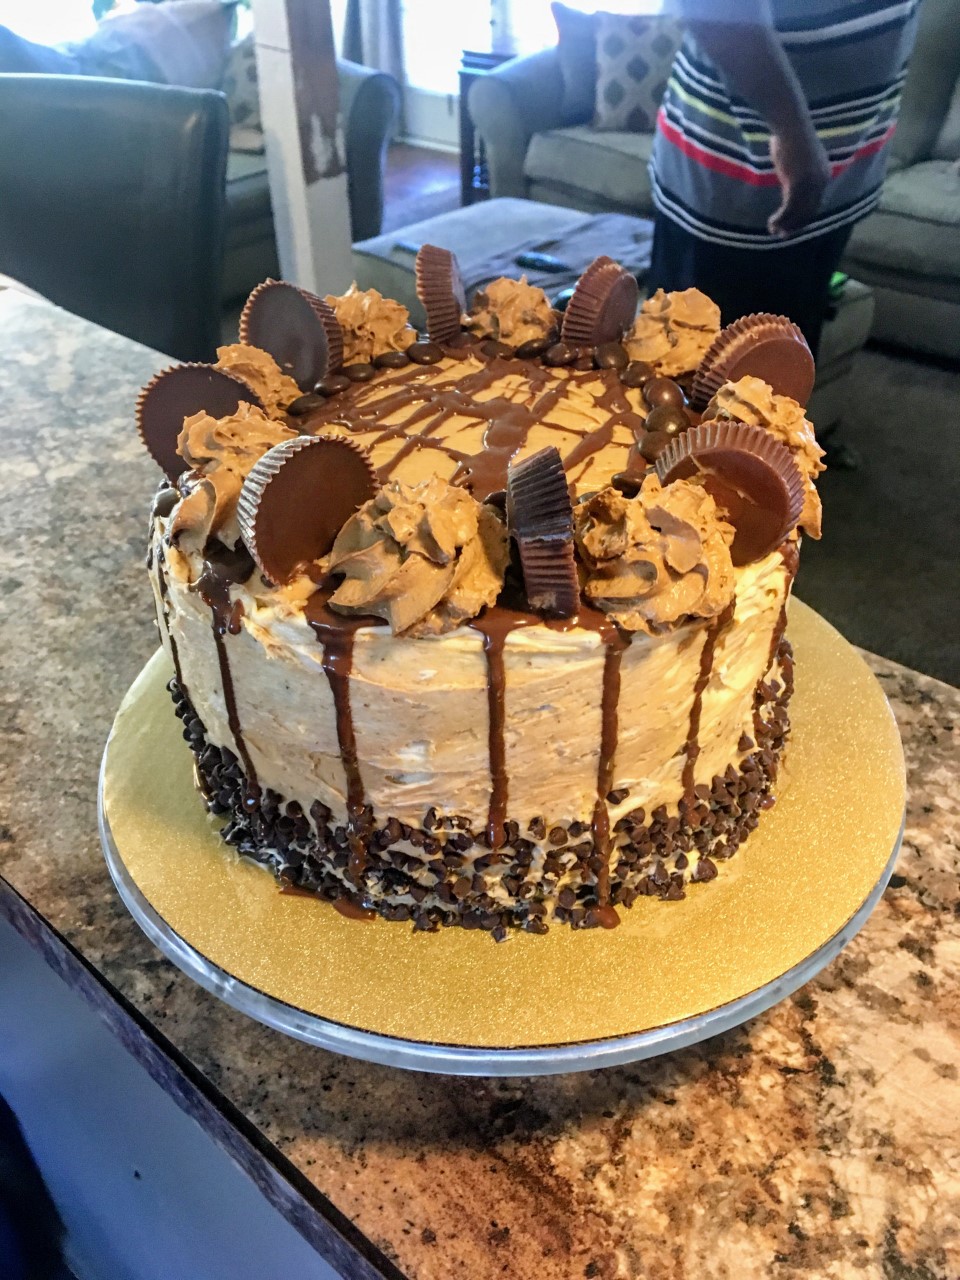 Chocolate cake with A peanut butter buttercream frosting with Reese’s peanut butter cups and chocolate drizzle